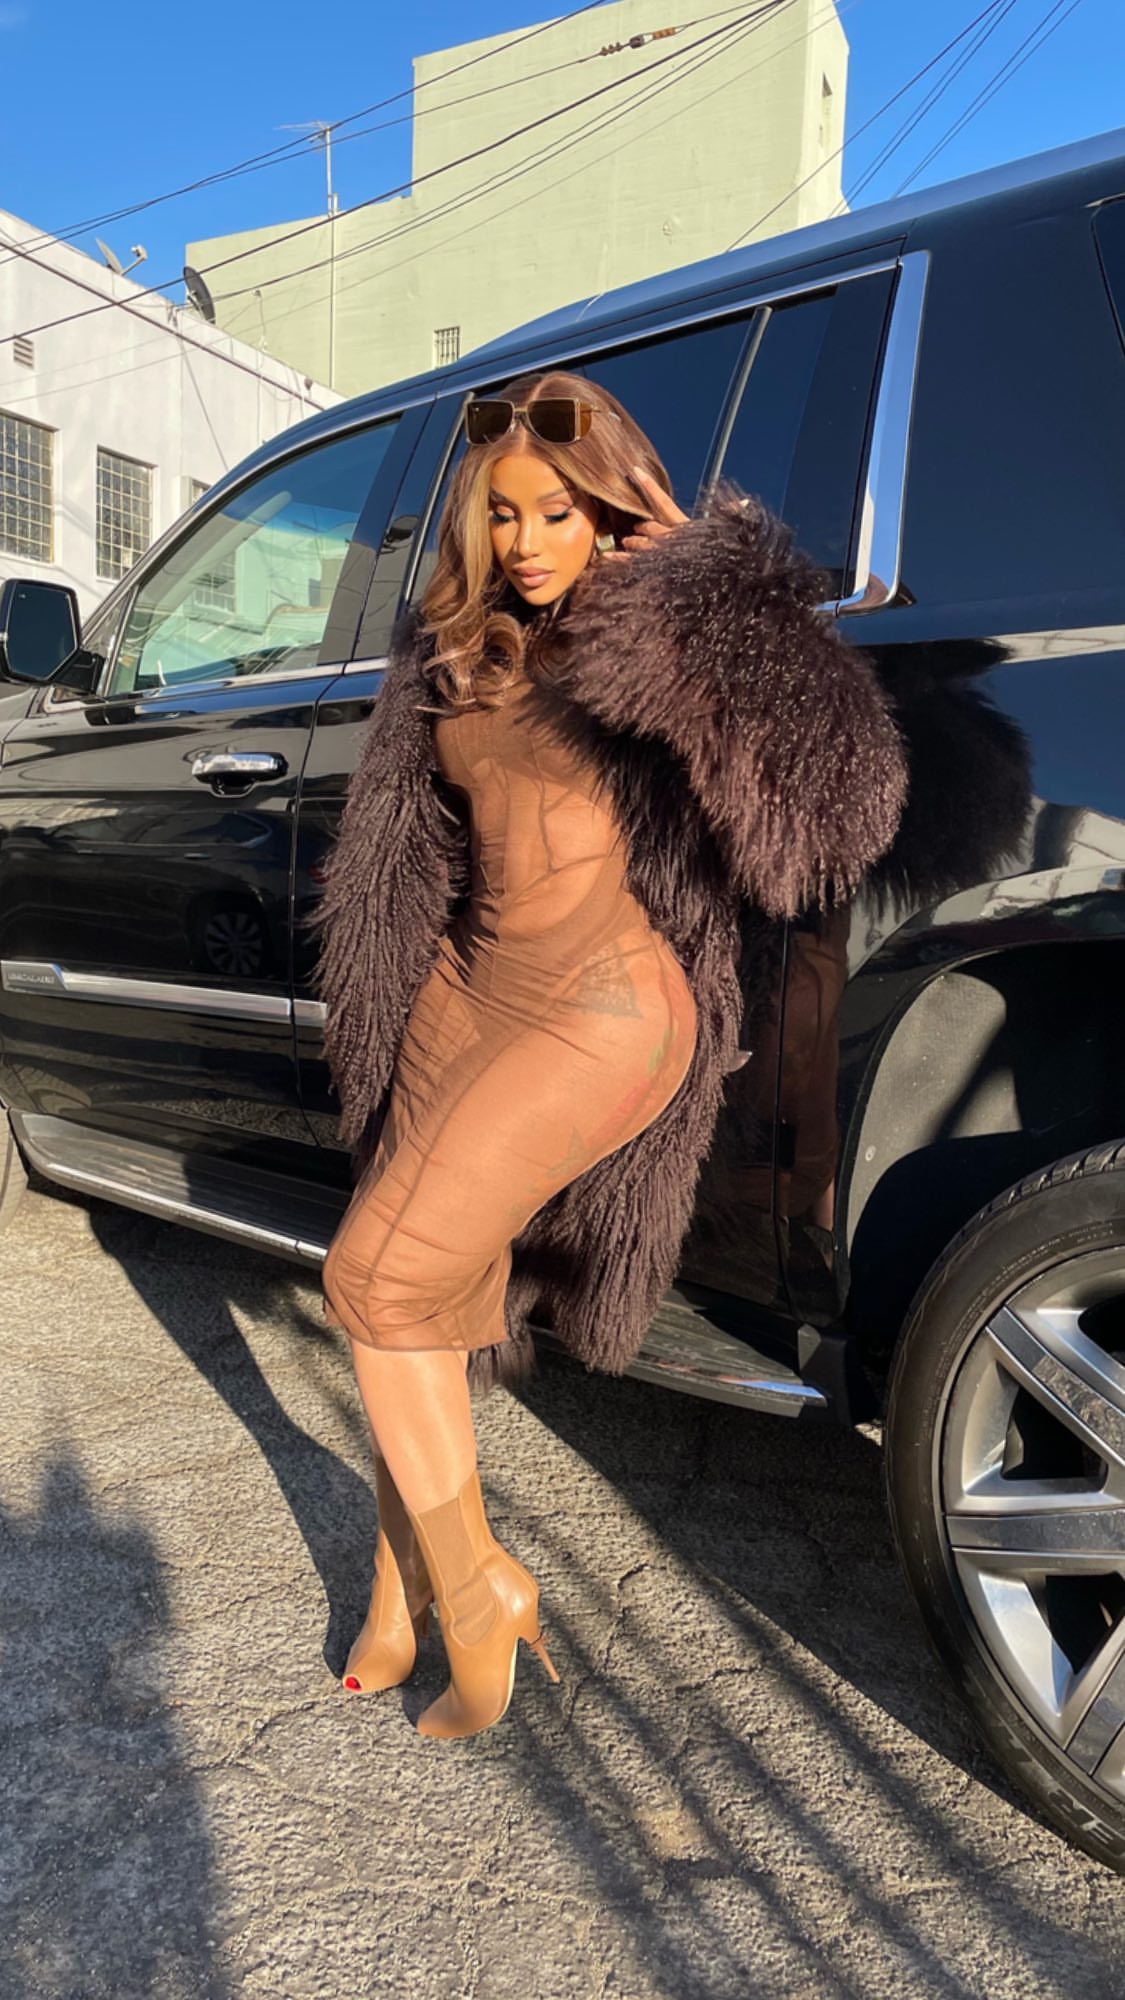 Cardi B is Ready to Go Home! - Photo 4